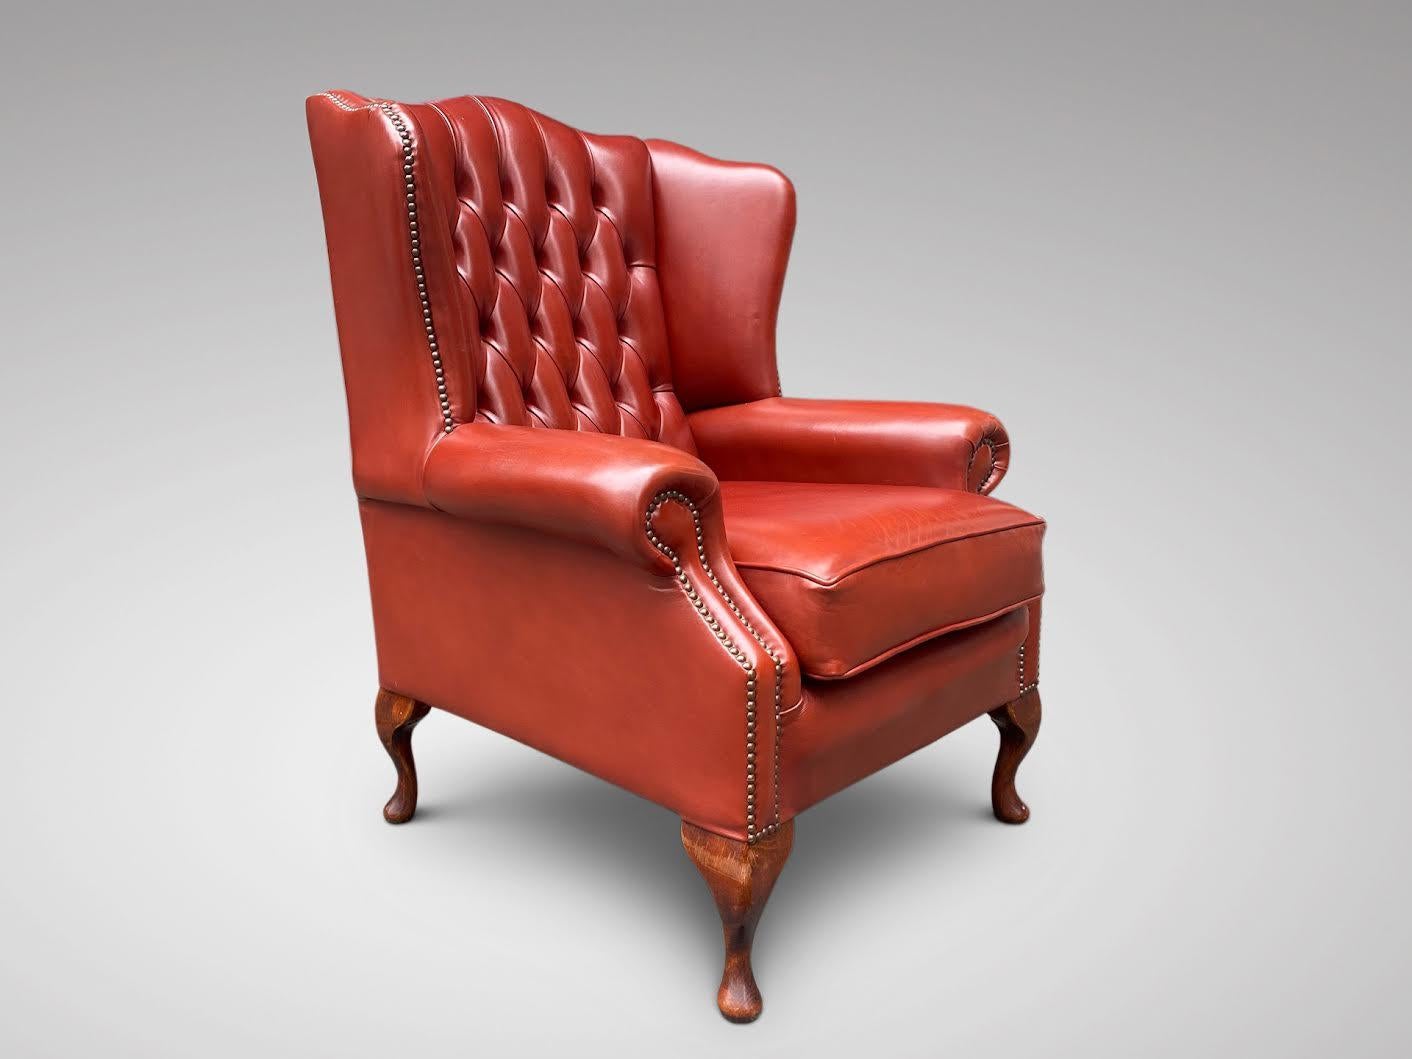 A very comfortable and good quality mid century red leather wing armchair with buttoned back and loose cushion, standing on walnut cabriole feet.

The dimensions are:
Height: 107cm (42.1in)
Width: 82cm (32.3in)
Depth: 75cm (29.5in)

Very comfortable